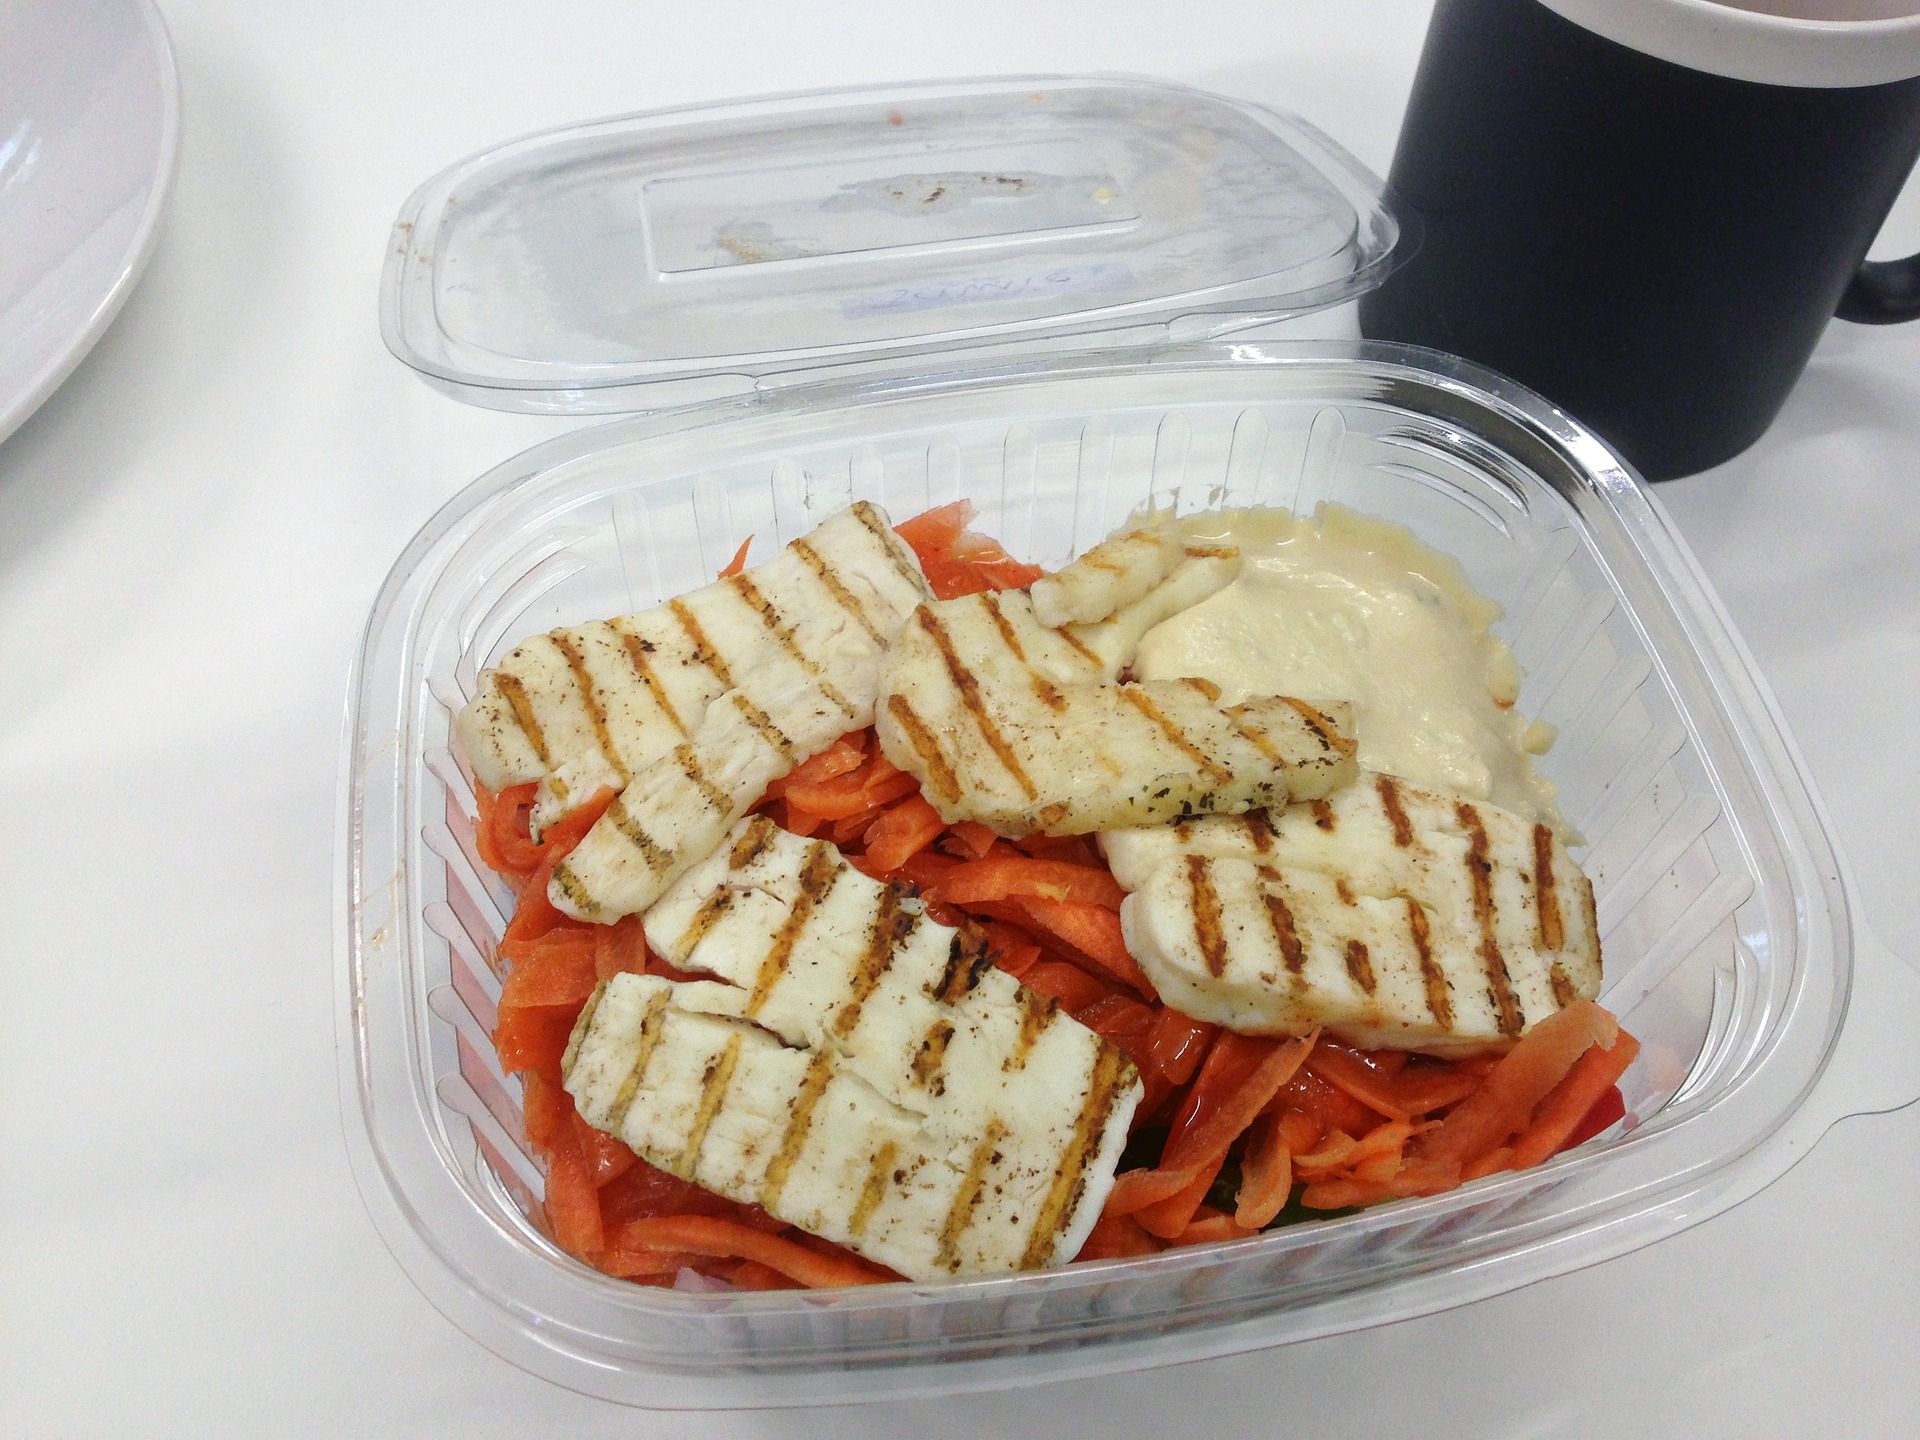 halloumi cheese in a salad